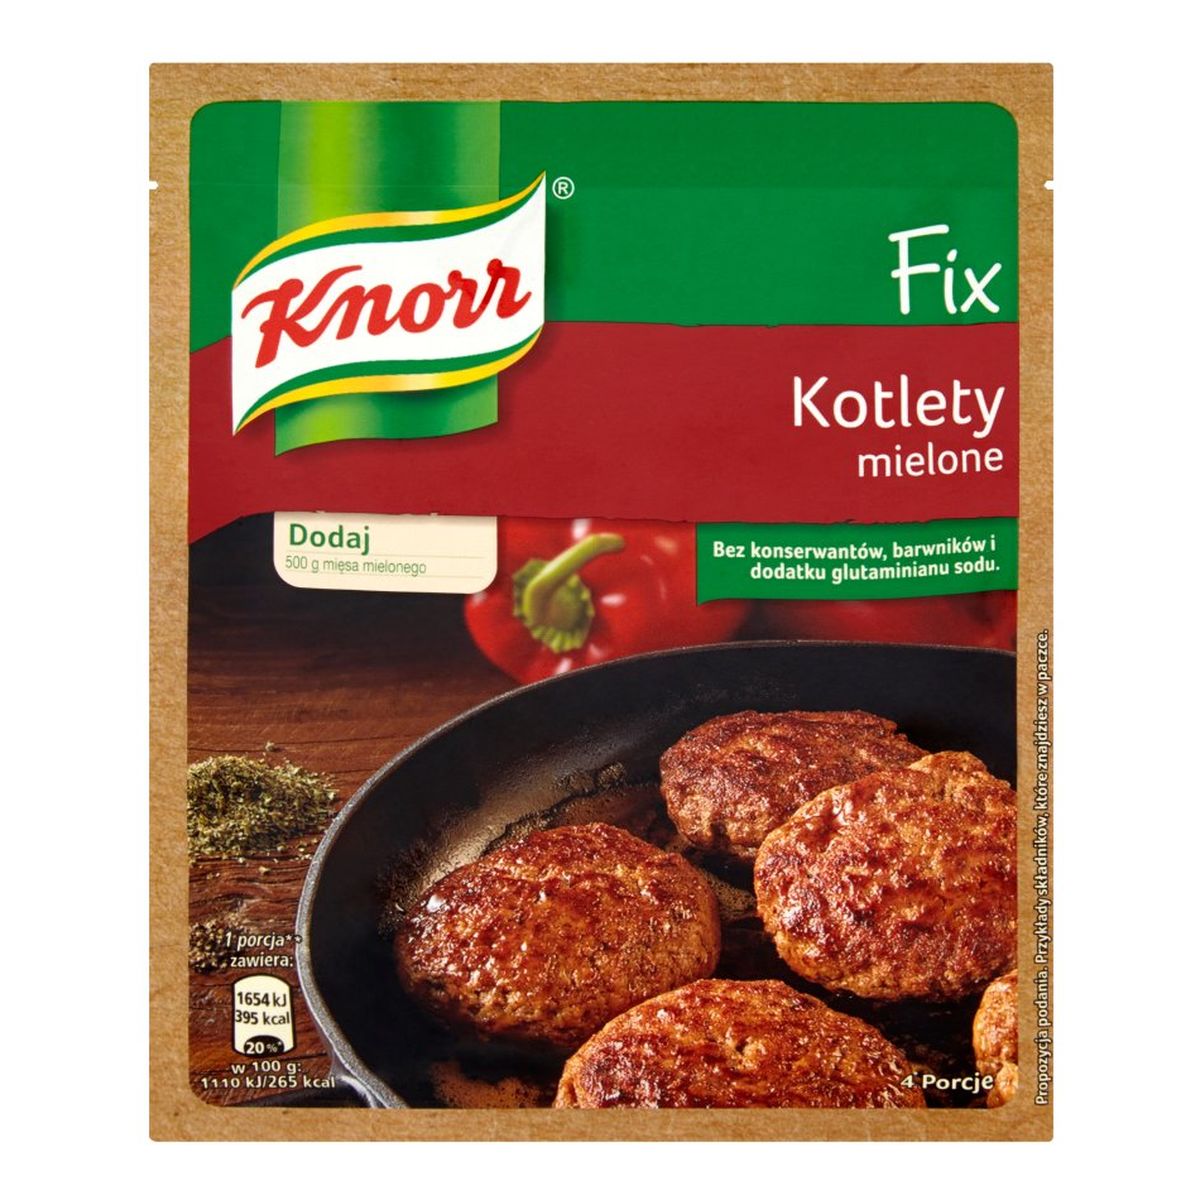 Knorr Fix Kotlety mielone 64g